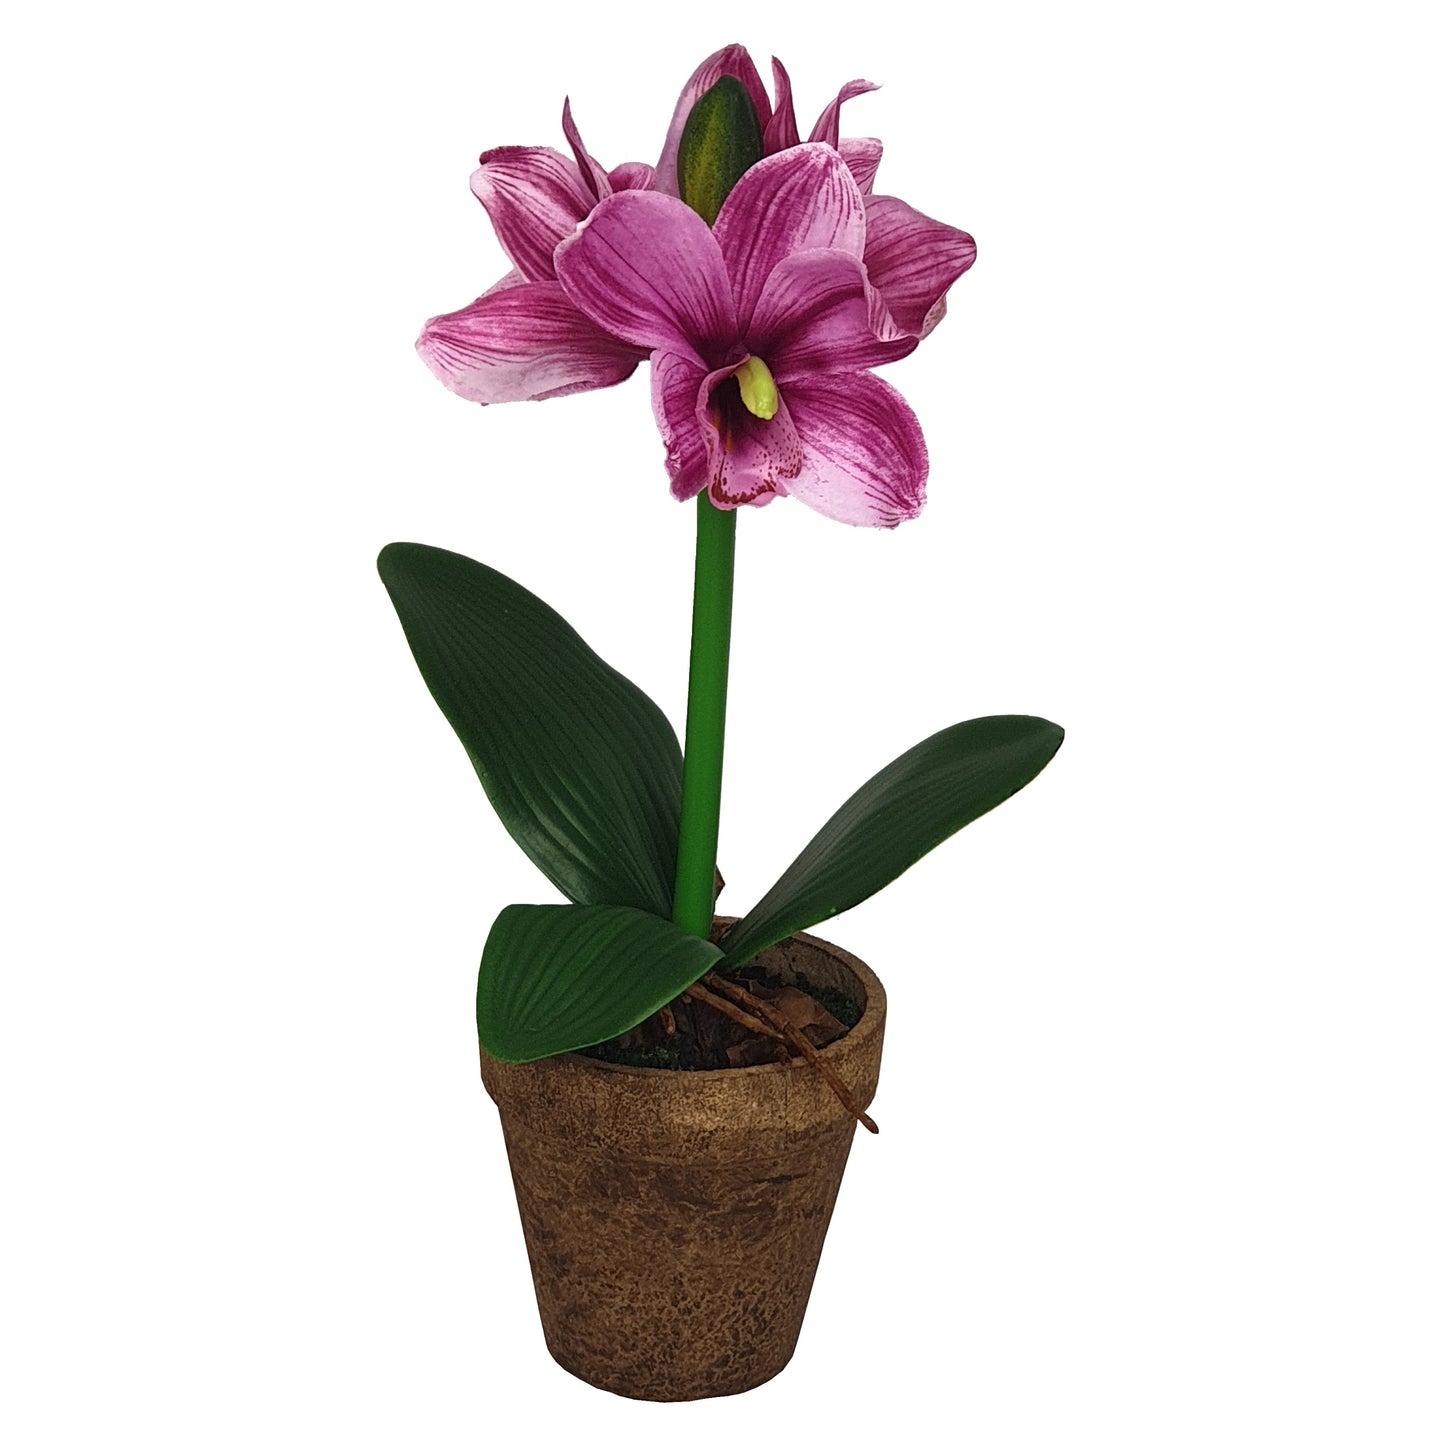 Criterion Artificial Potted Pearl Pink Flower 400mm